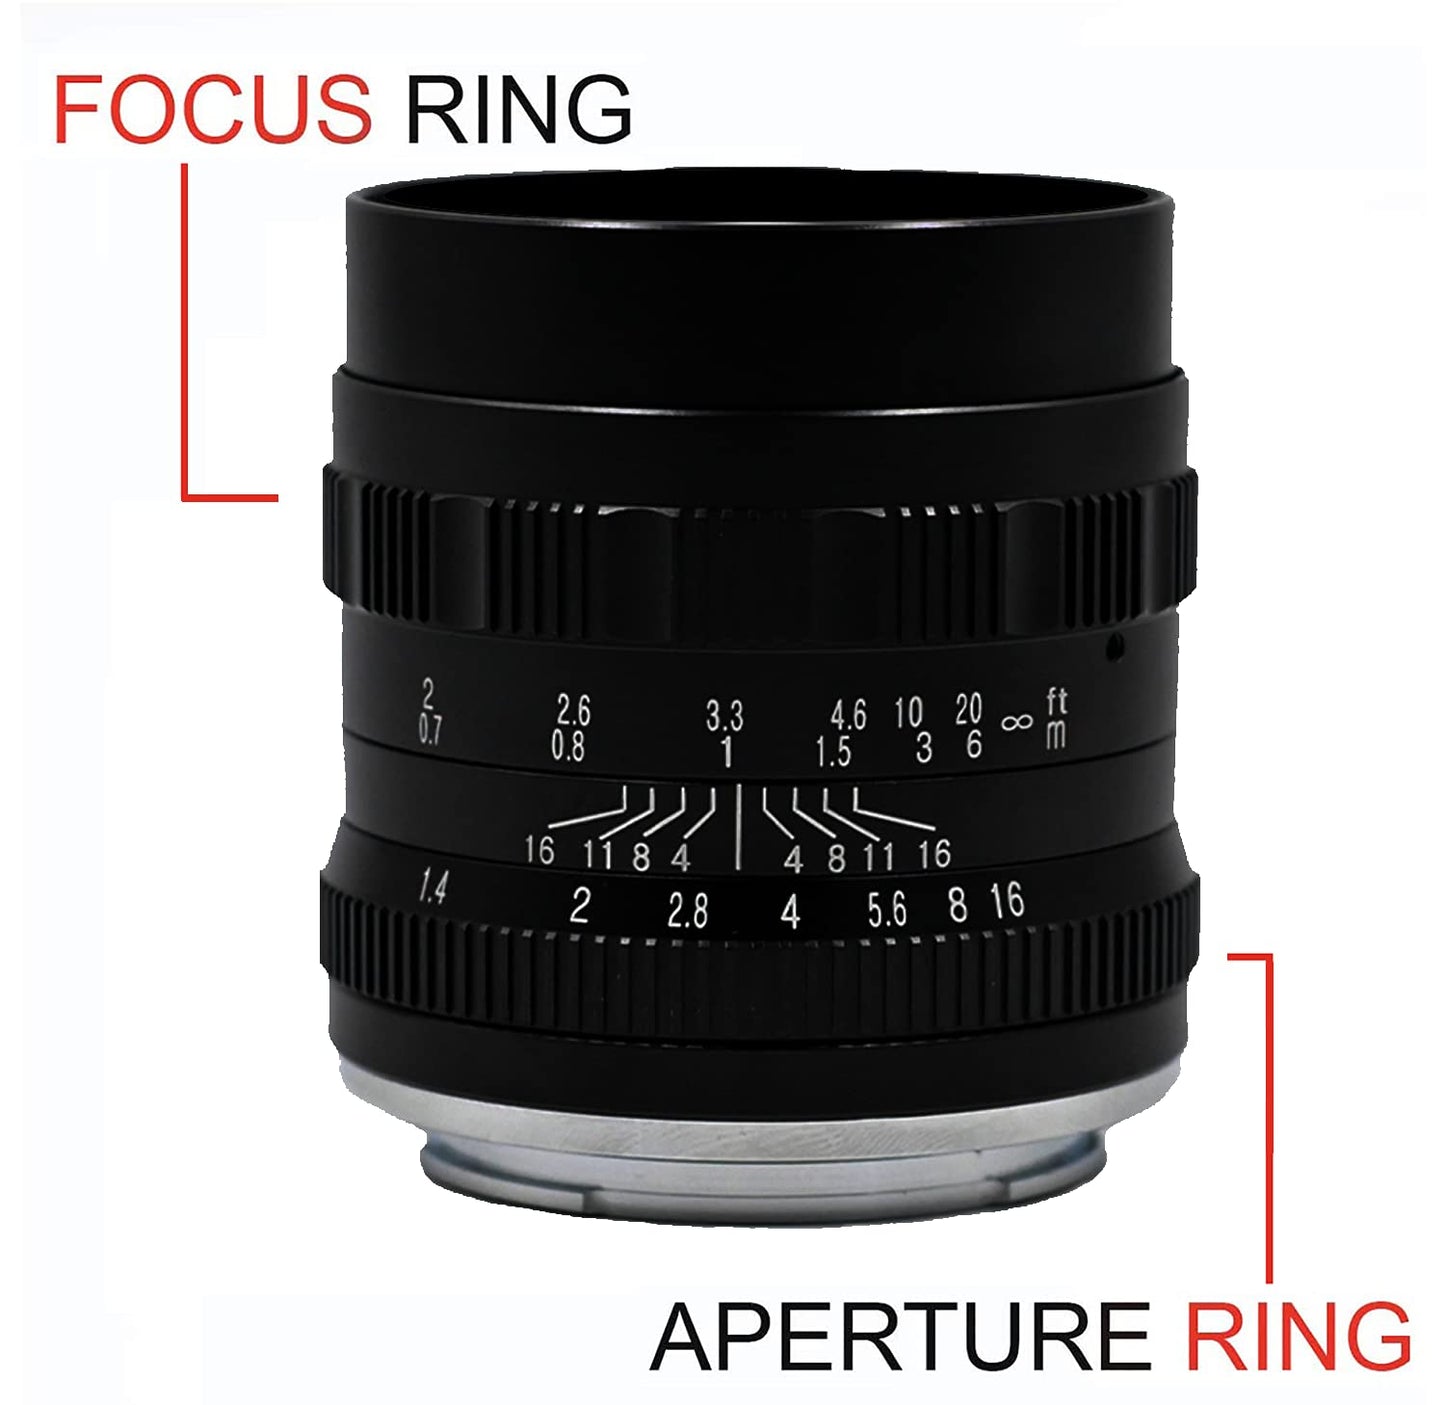 50mm F1.4 Manual Focus Prime Lens for Panasonic Olympus Micro 4/3 Mirrorless Cameras, APS-C MF Large Aperture Standard Fixed Lens, Fit for LUMIX G7, GX85, GX9, G95, GH5, GH6, G100, G9